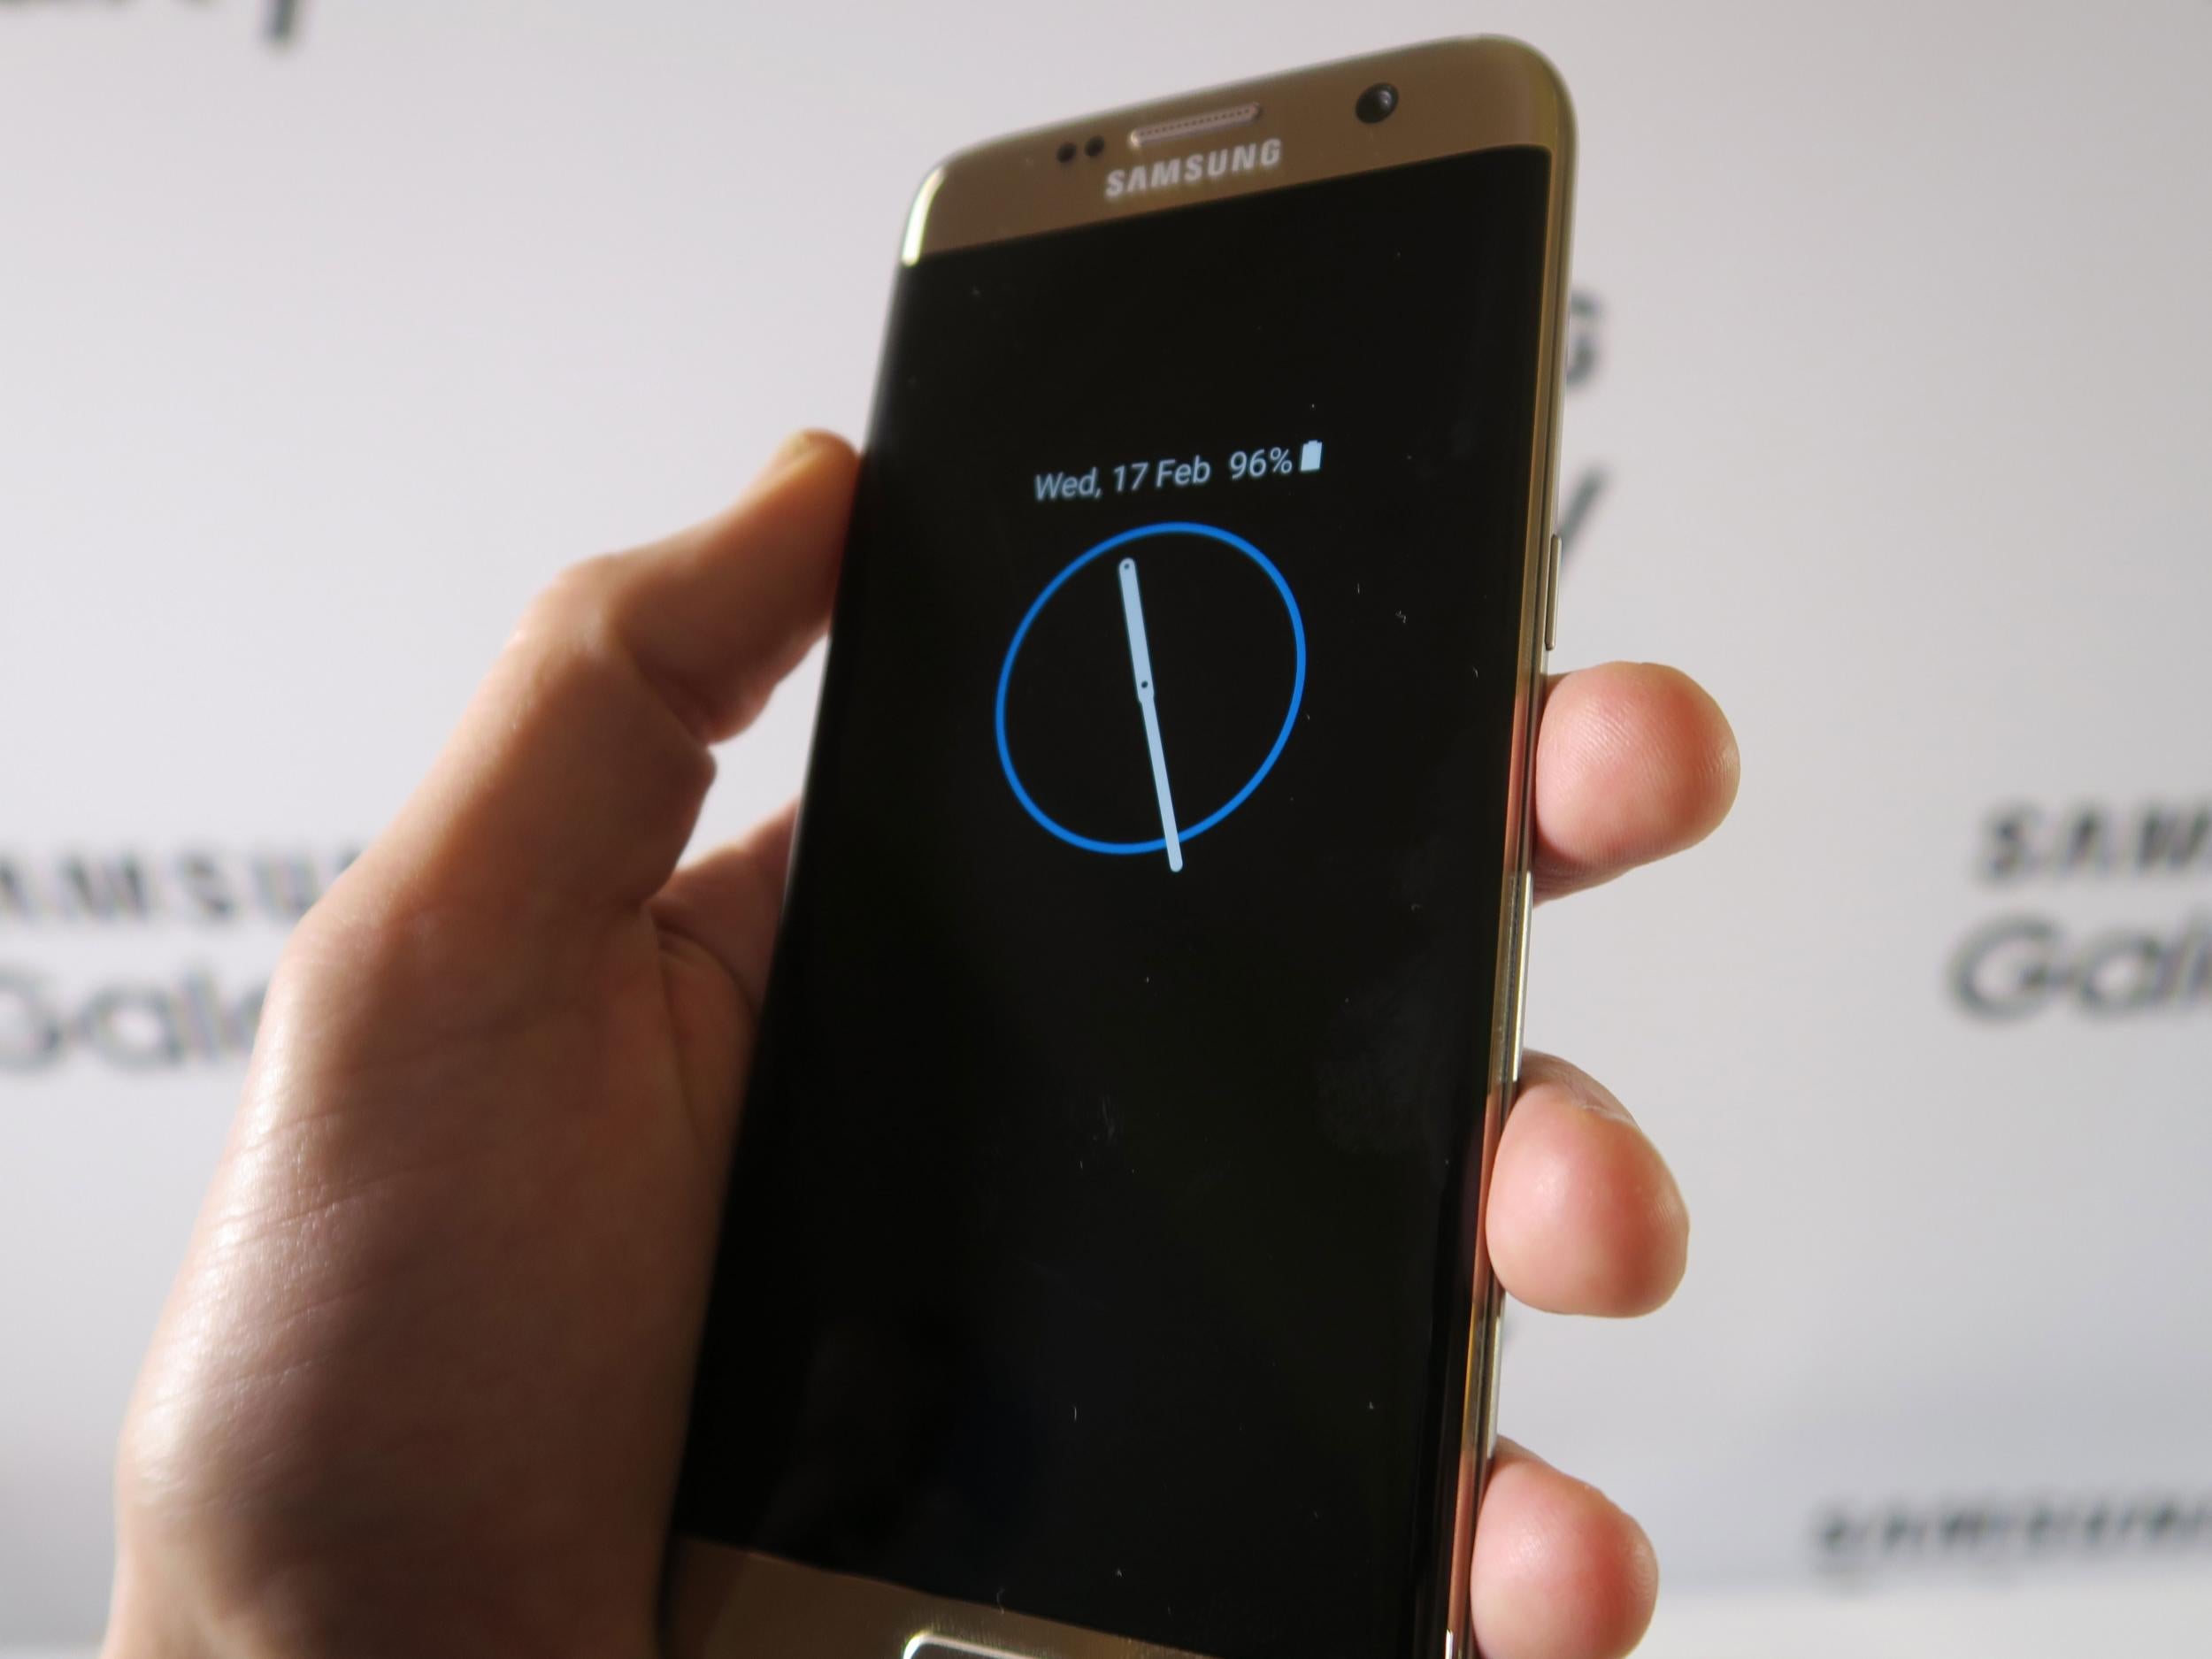 The S7's always-on display only uses up one per cent of battery per hour